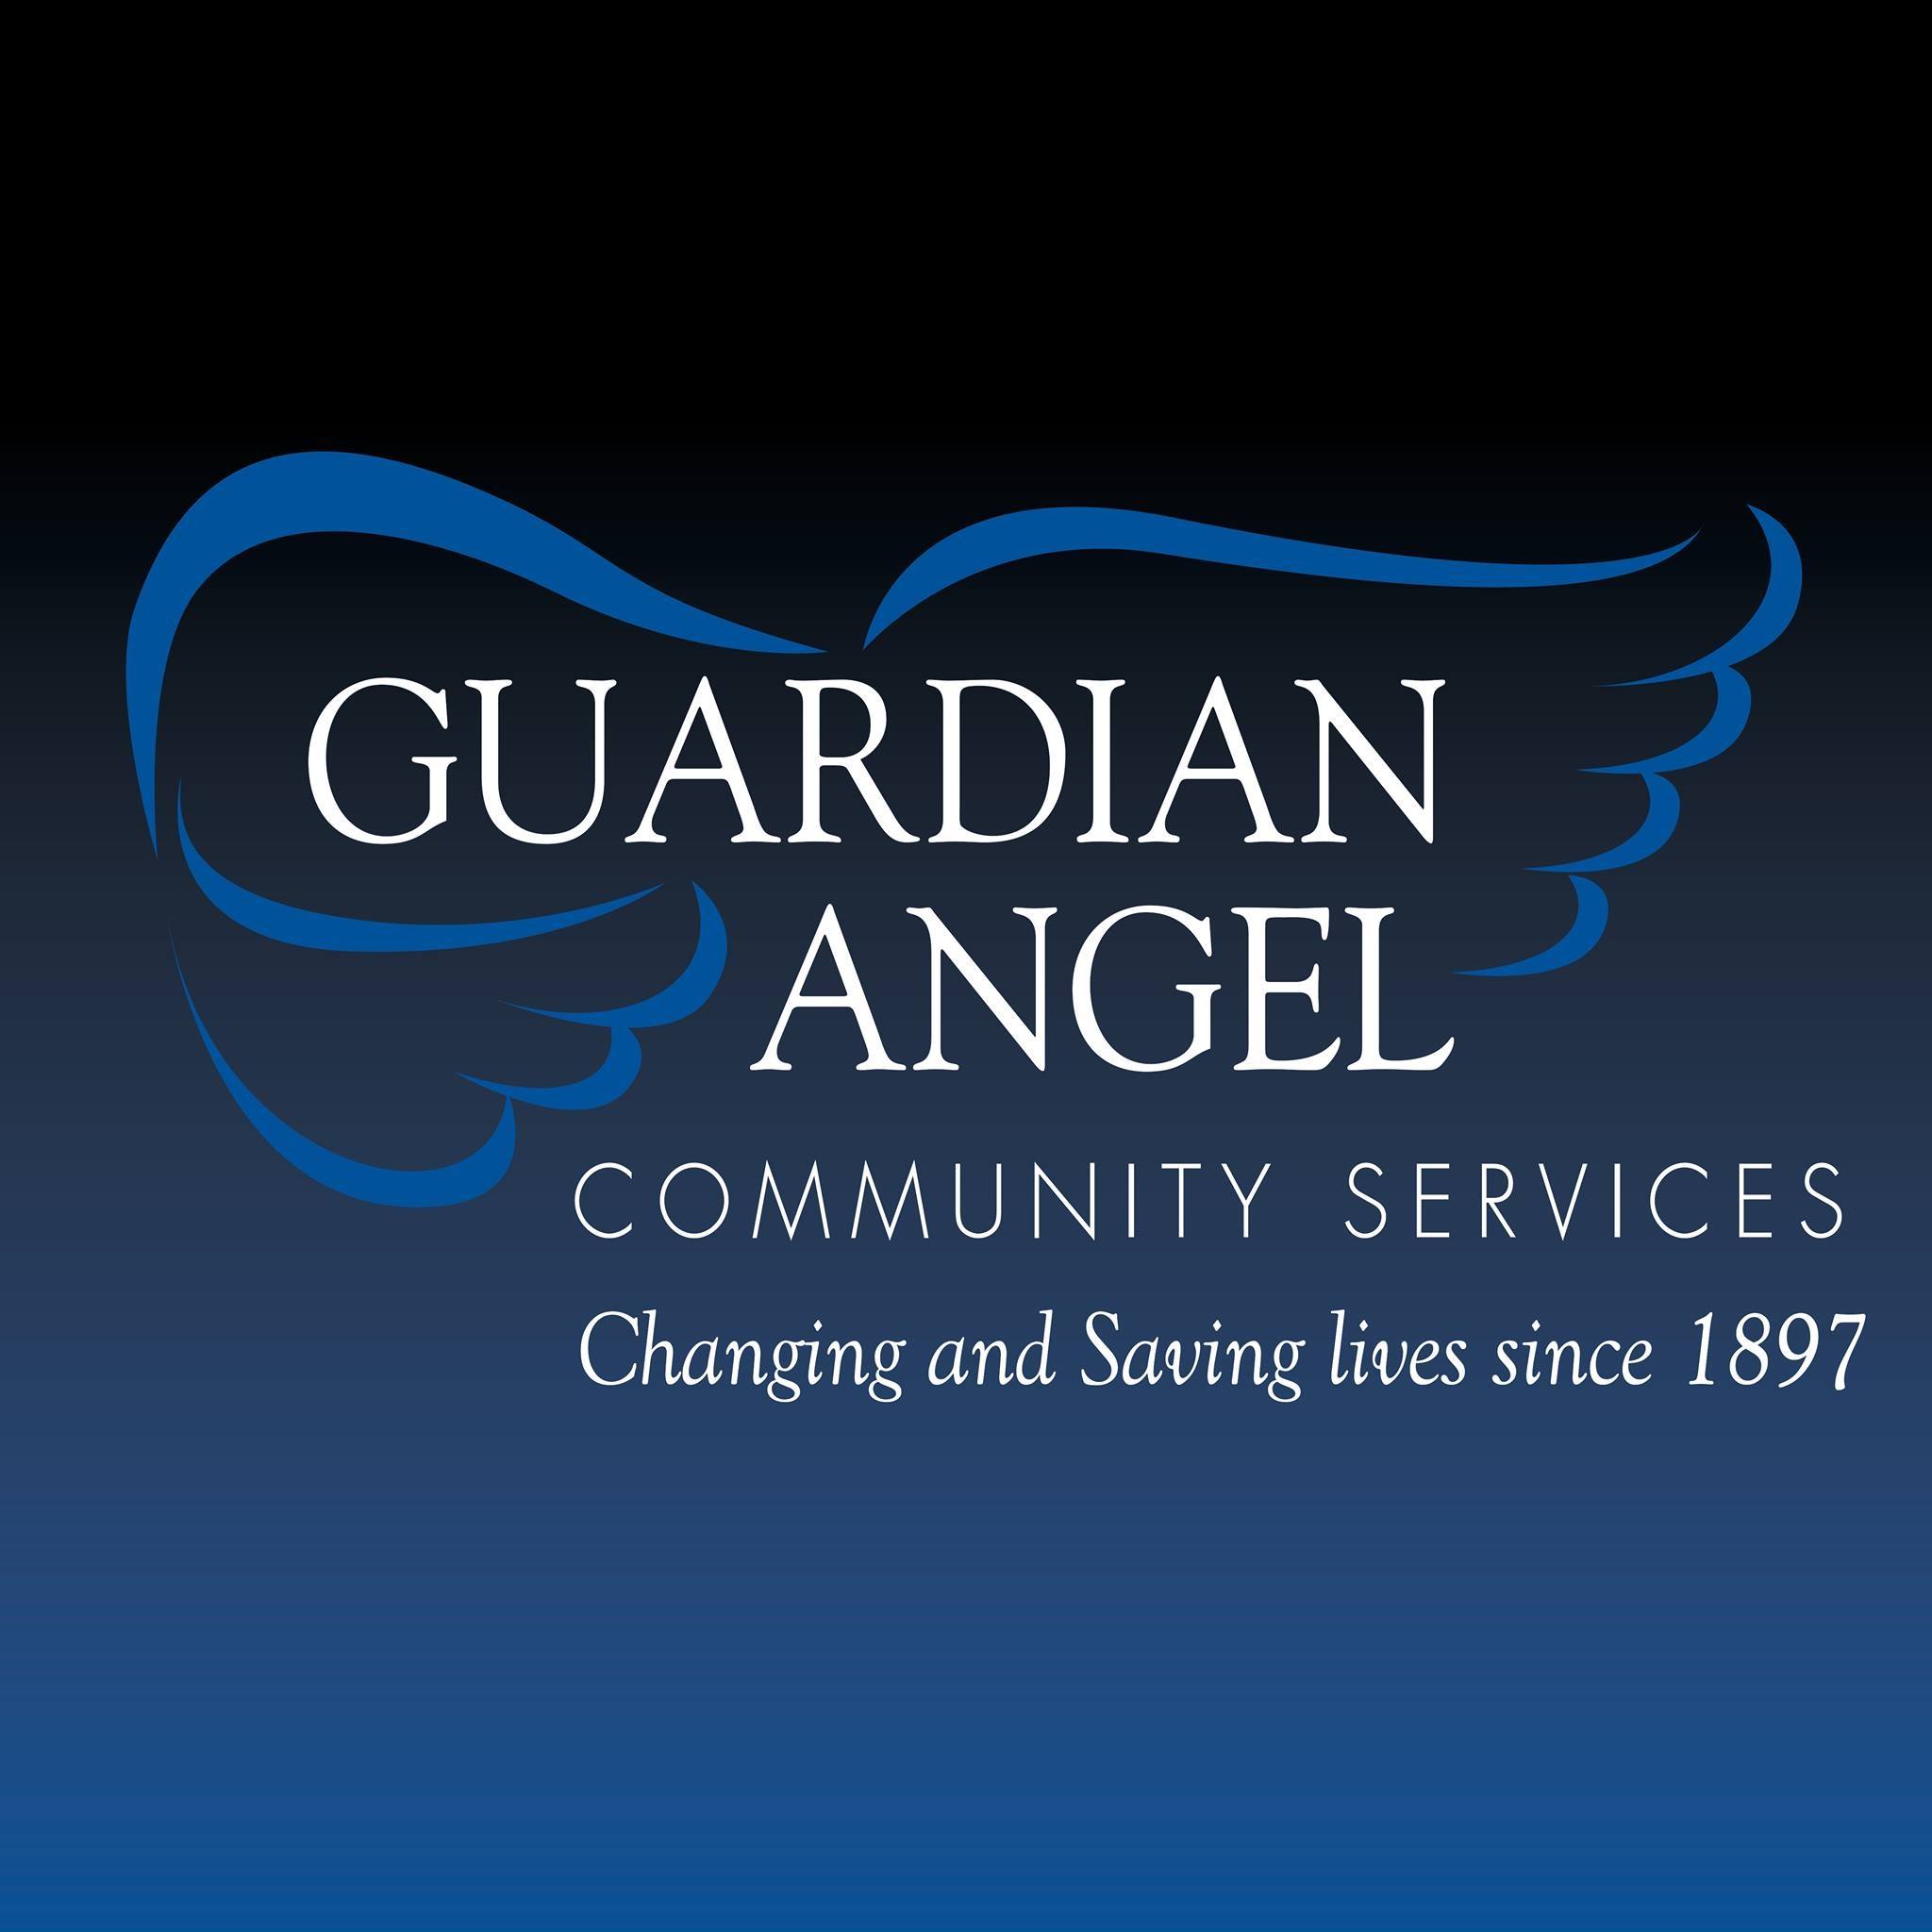 Emergency Shelter, Services for Domestic Violence Victims at Guardian Angel Community Services